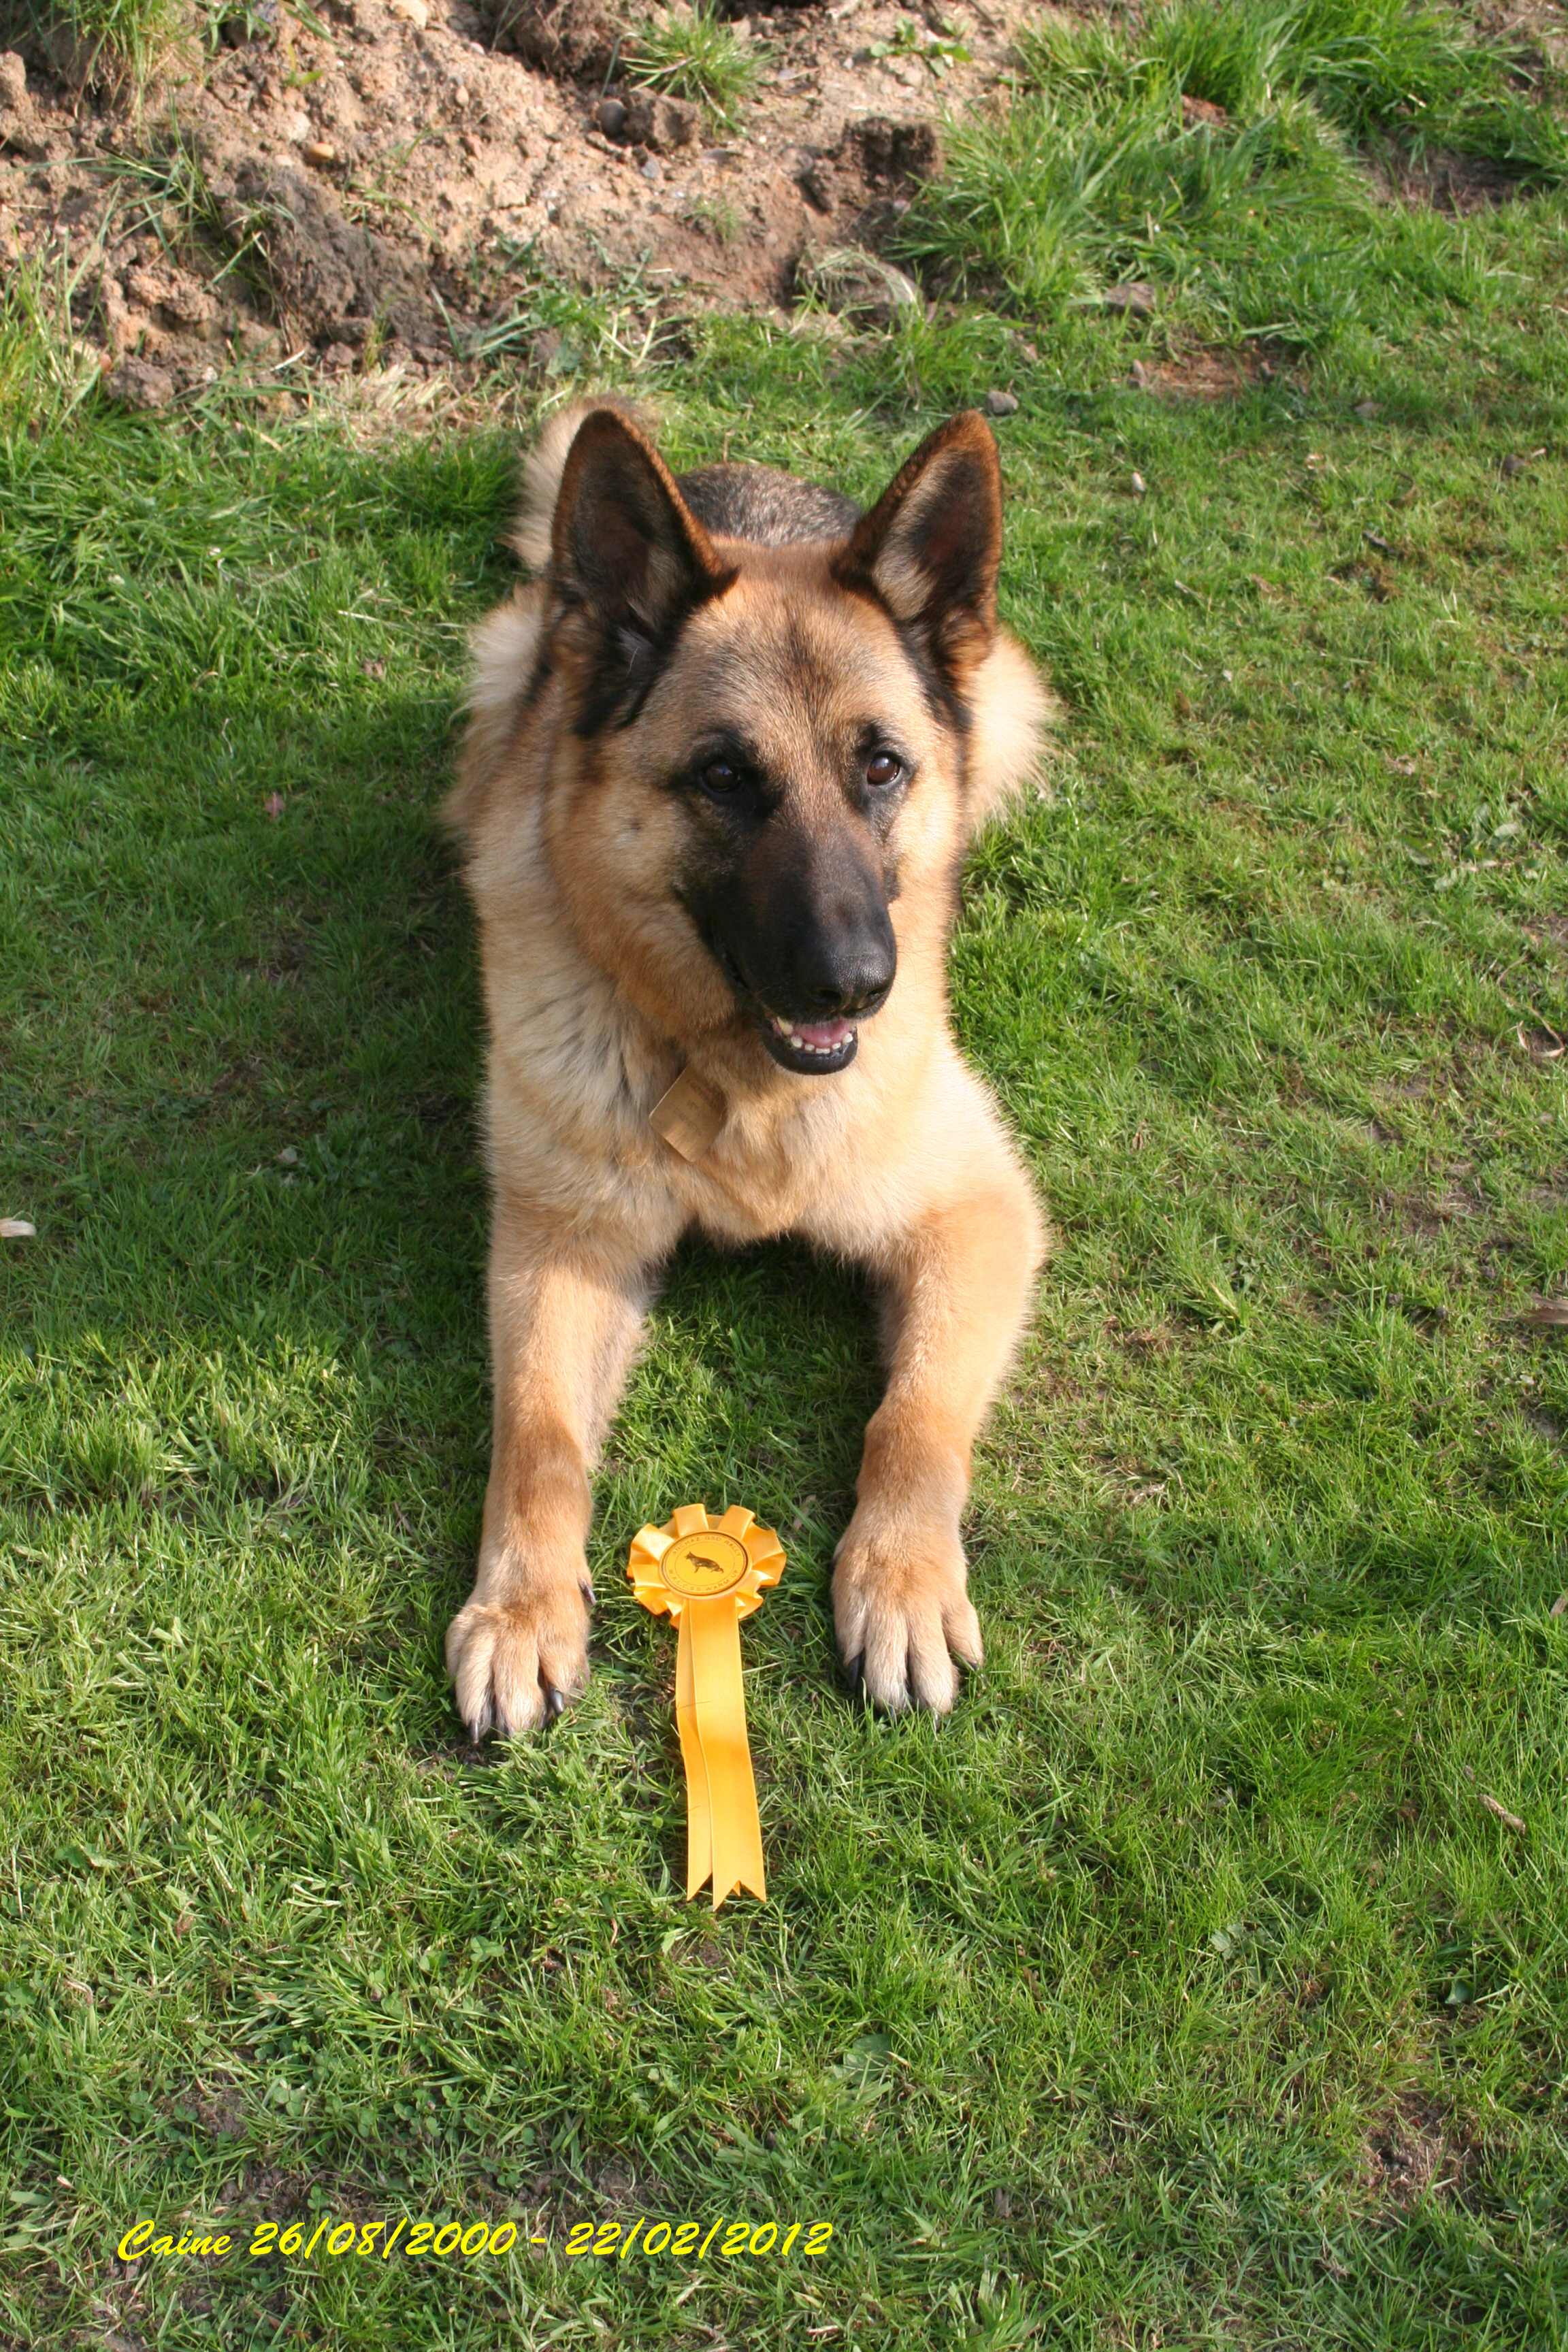 Caine, German Shepherd Rescue, died 22/Feb/2012 ages 11.5 with us for only 5yr and a day